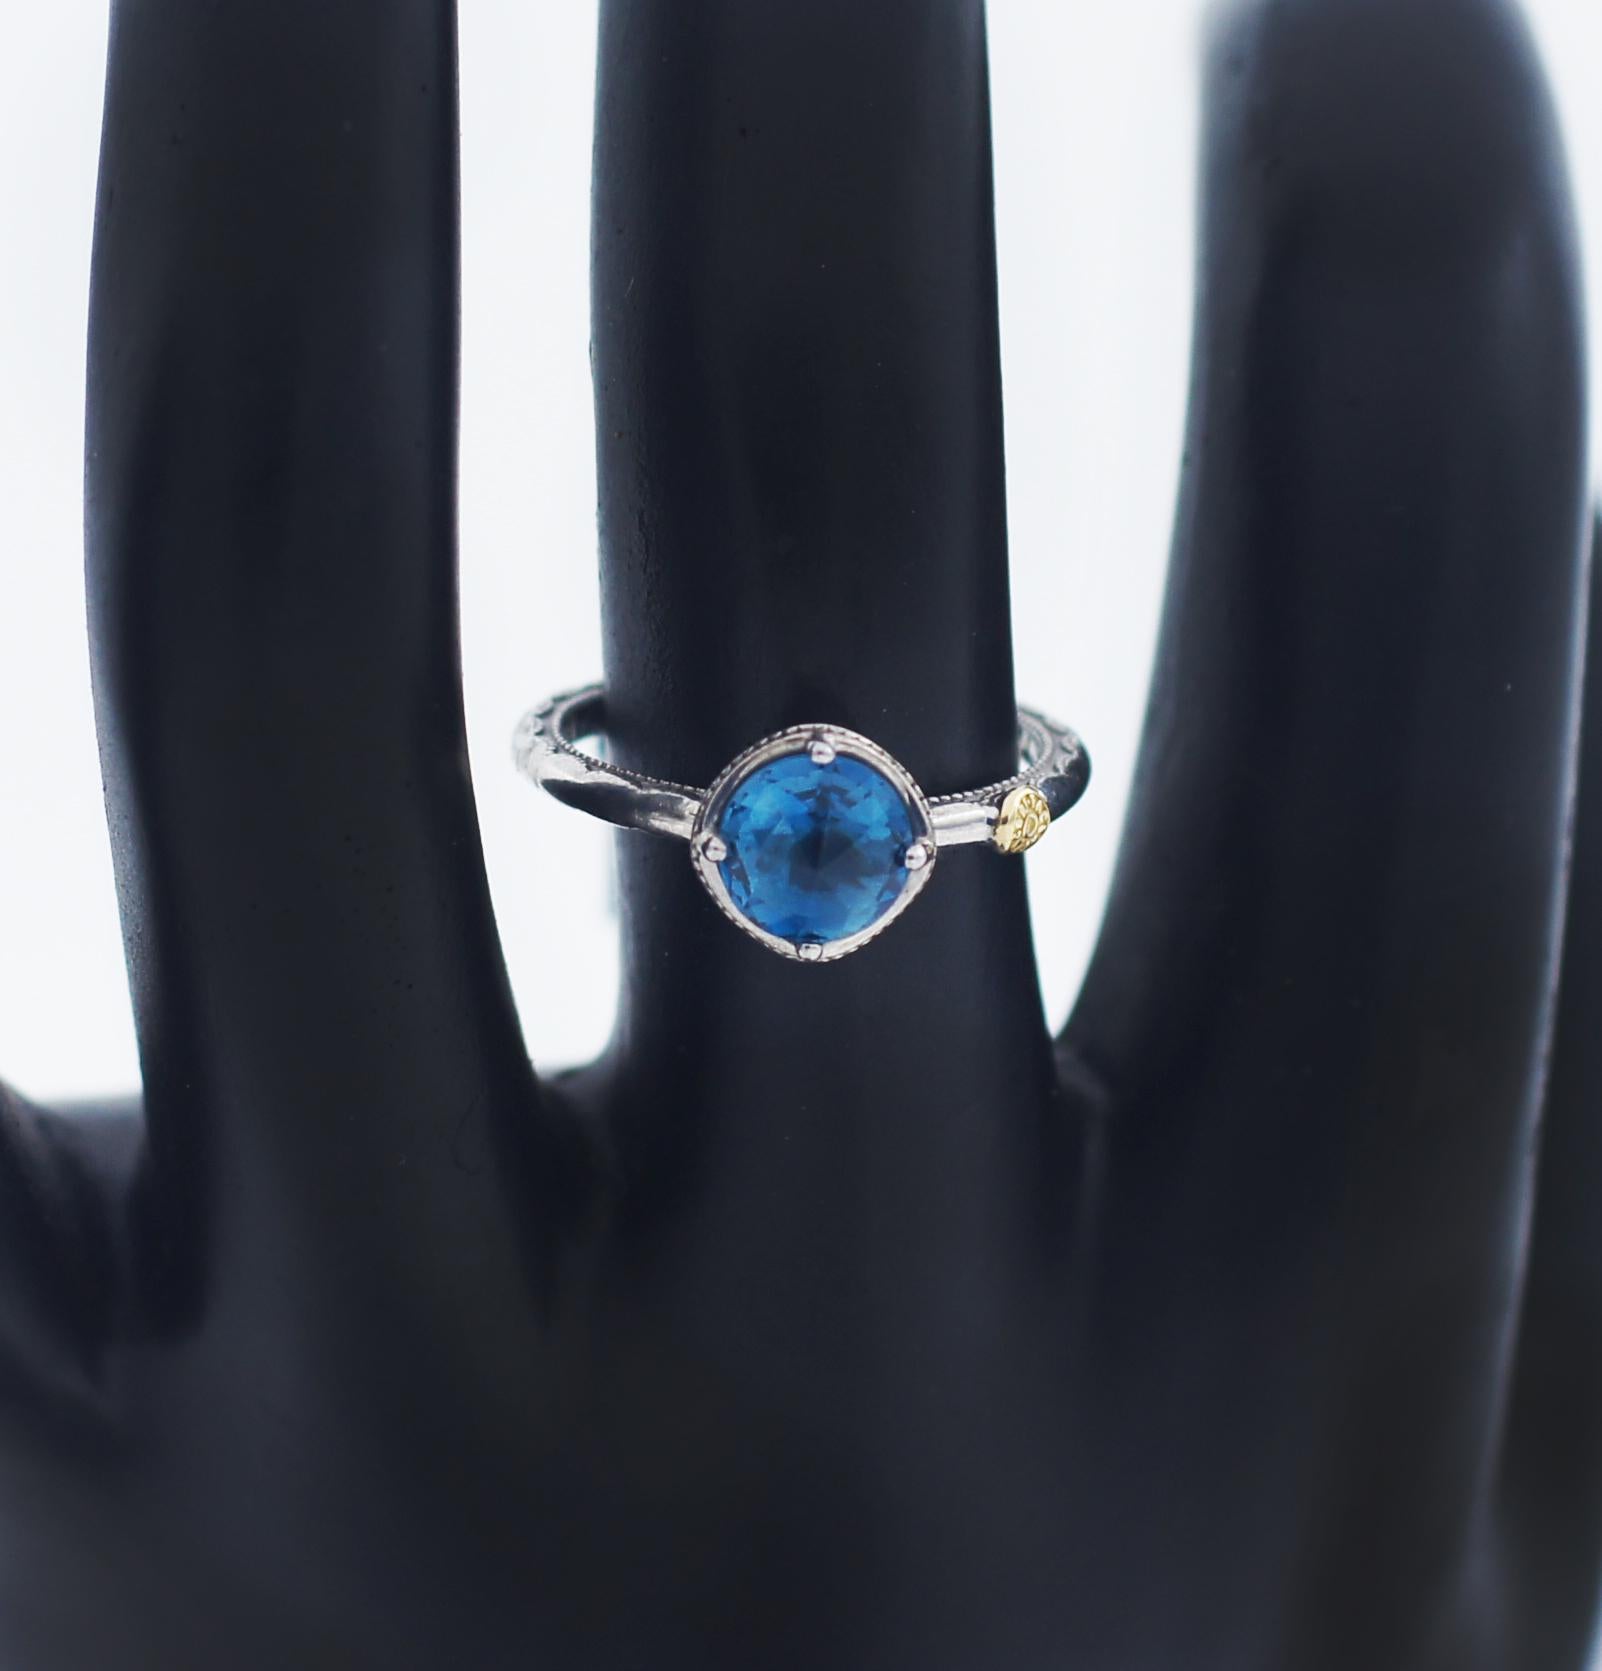 TACORI 
Gemma Bloom
Petite Simply Gem Ring featuring London Blue Topaz
Tacori STYLE SR13333
deep blue solitaire is perfect for you. The crescent engraved band with a combination of milgrain details and high polished finish exudes